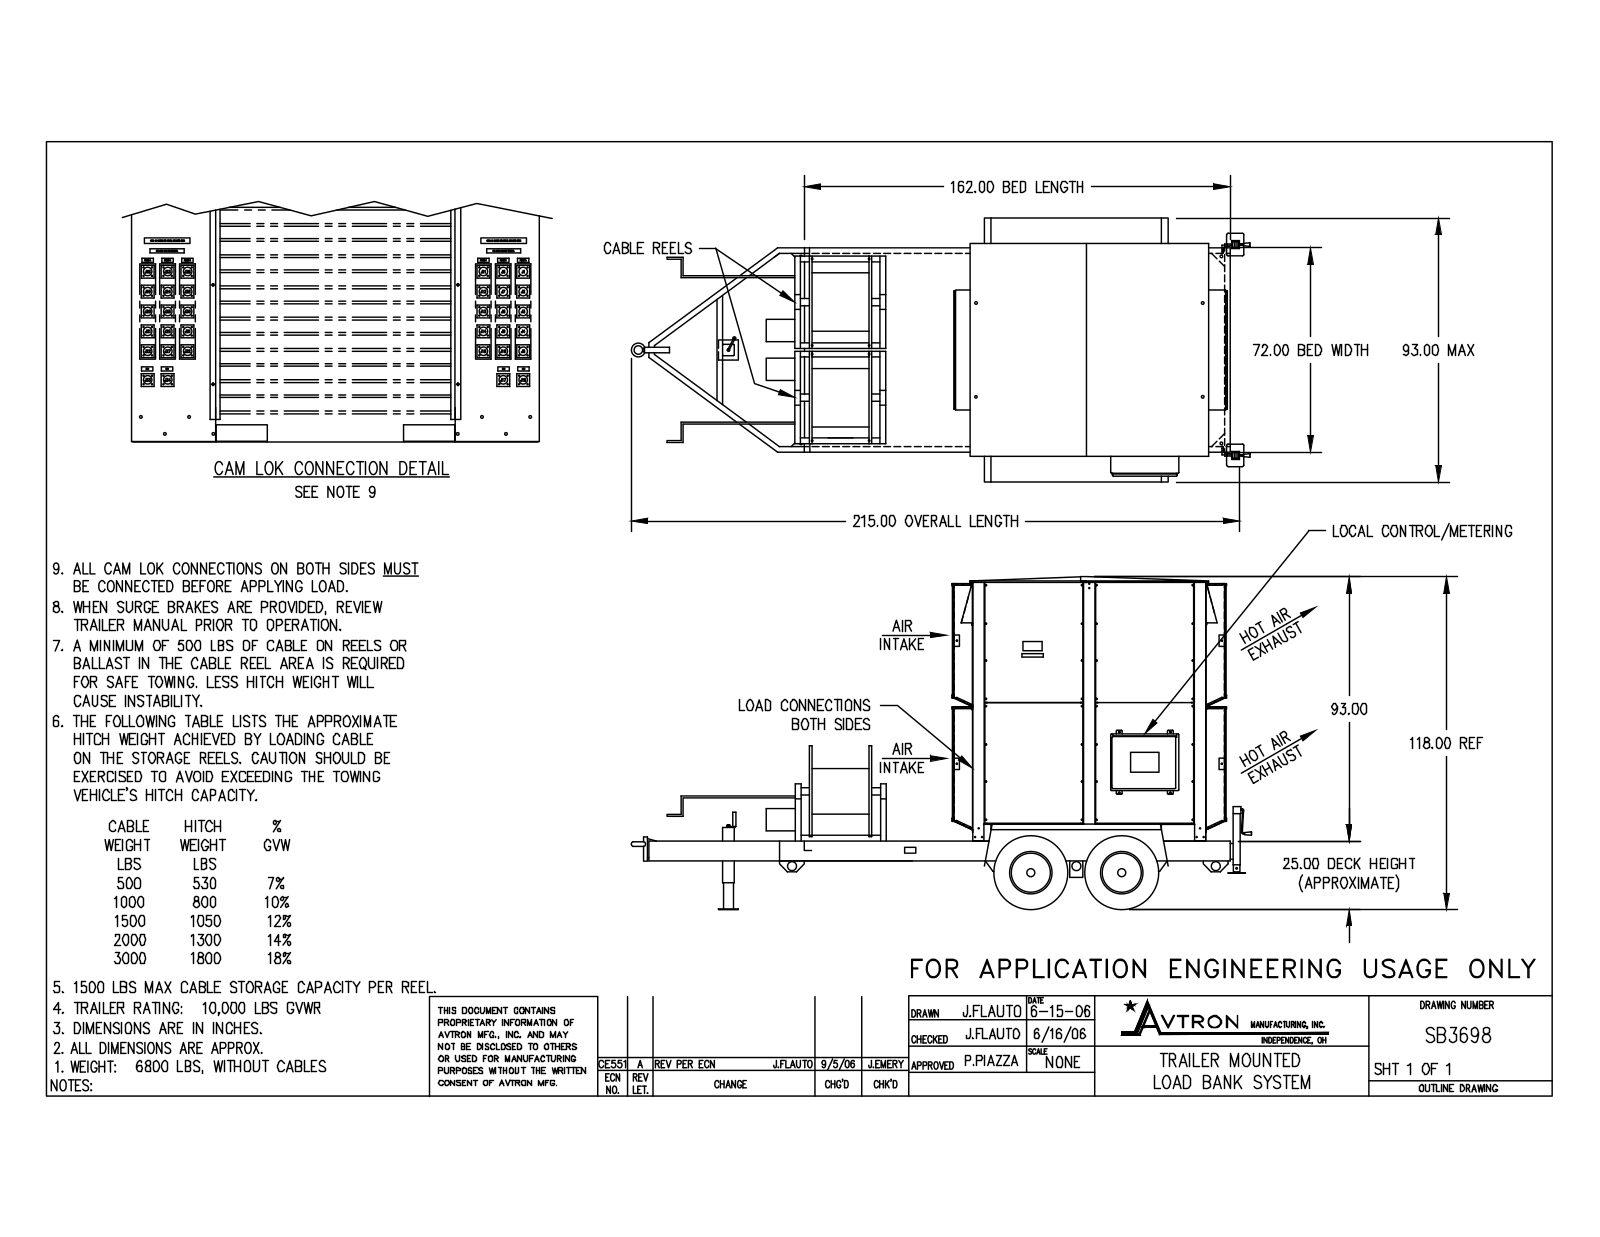 Emerson K580HC, K975A Diagrams and Drawings